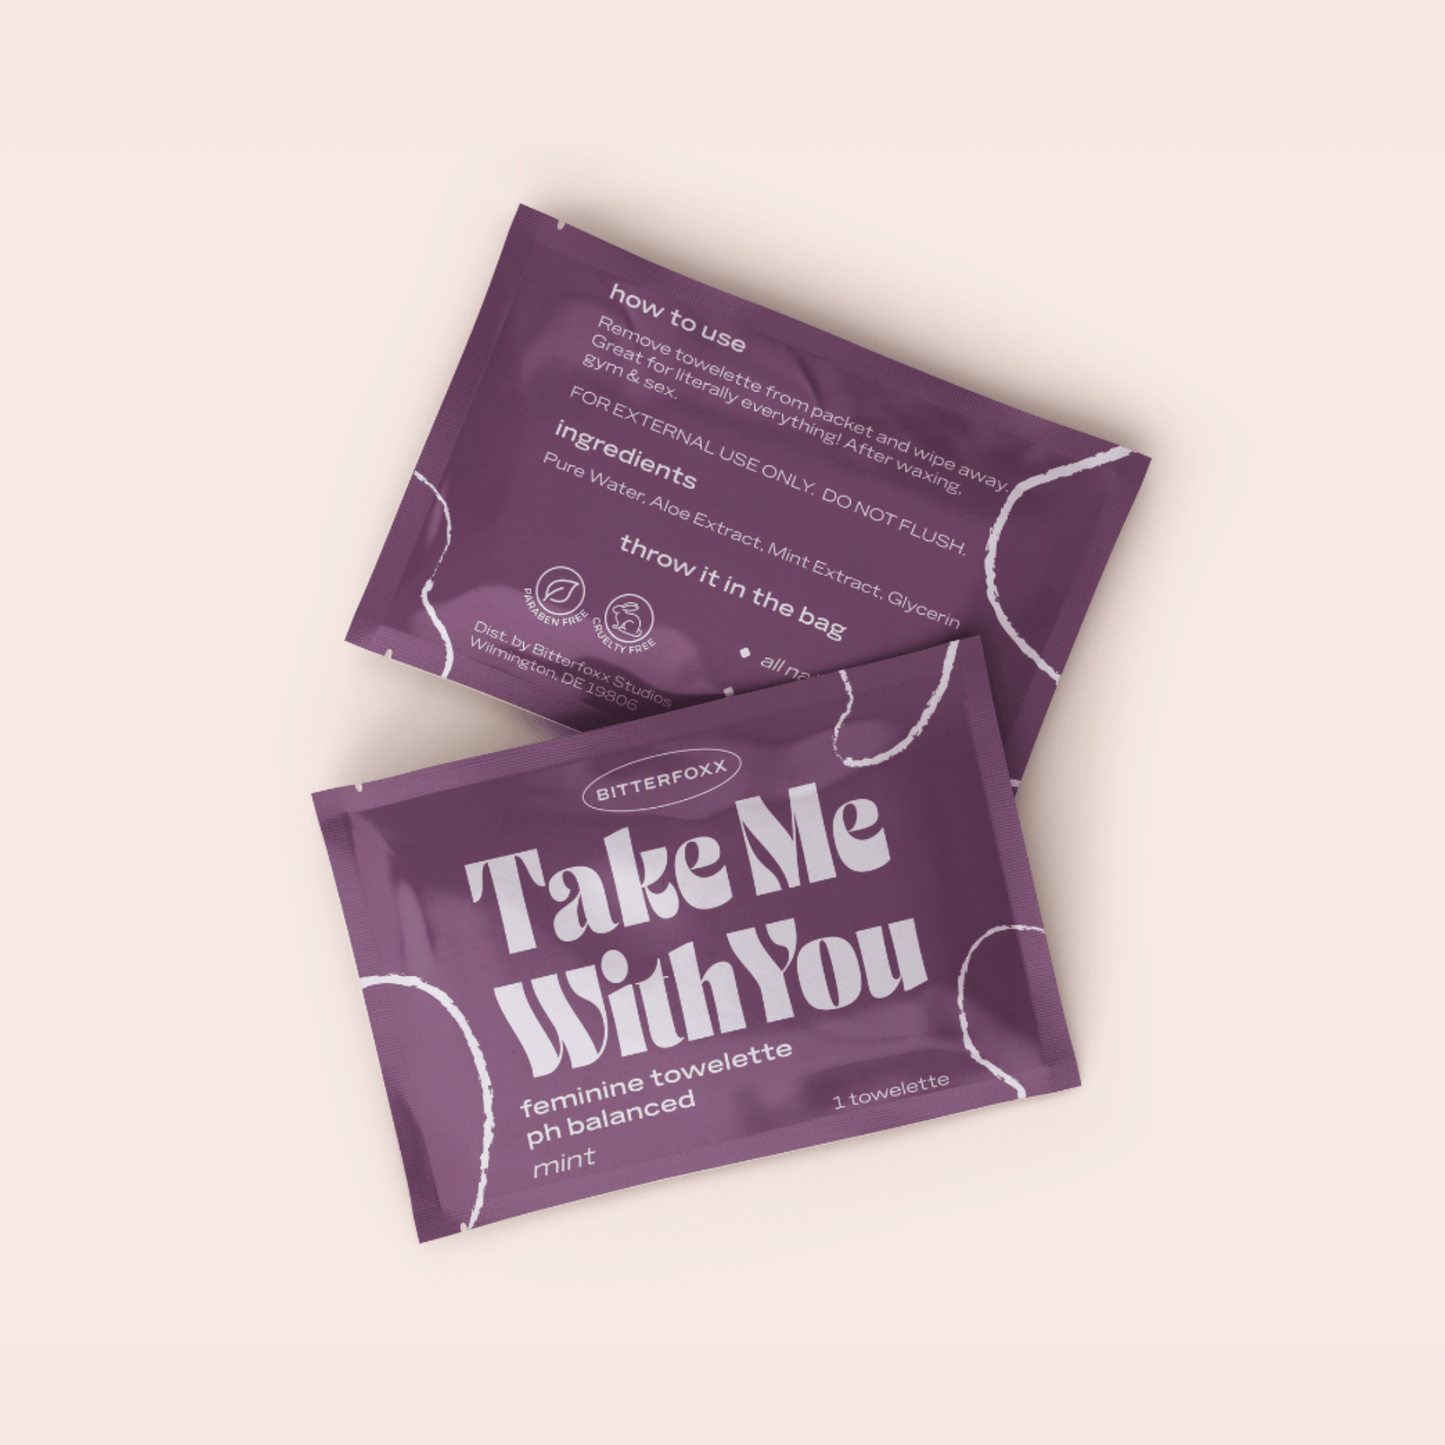 TAKE ME WITH YOU mint feminine towelettes